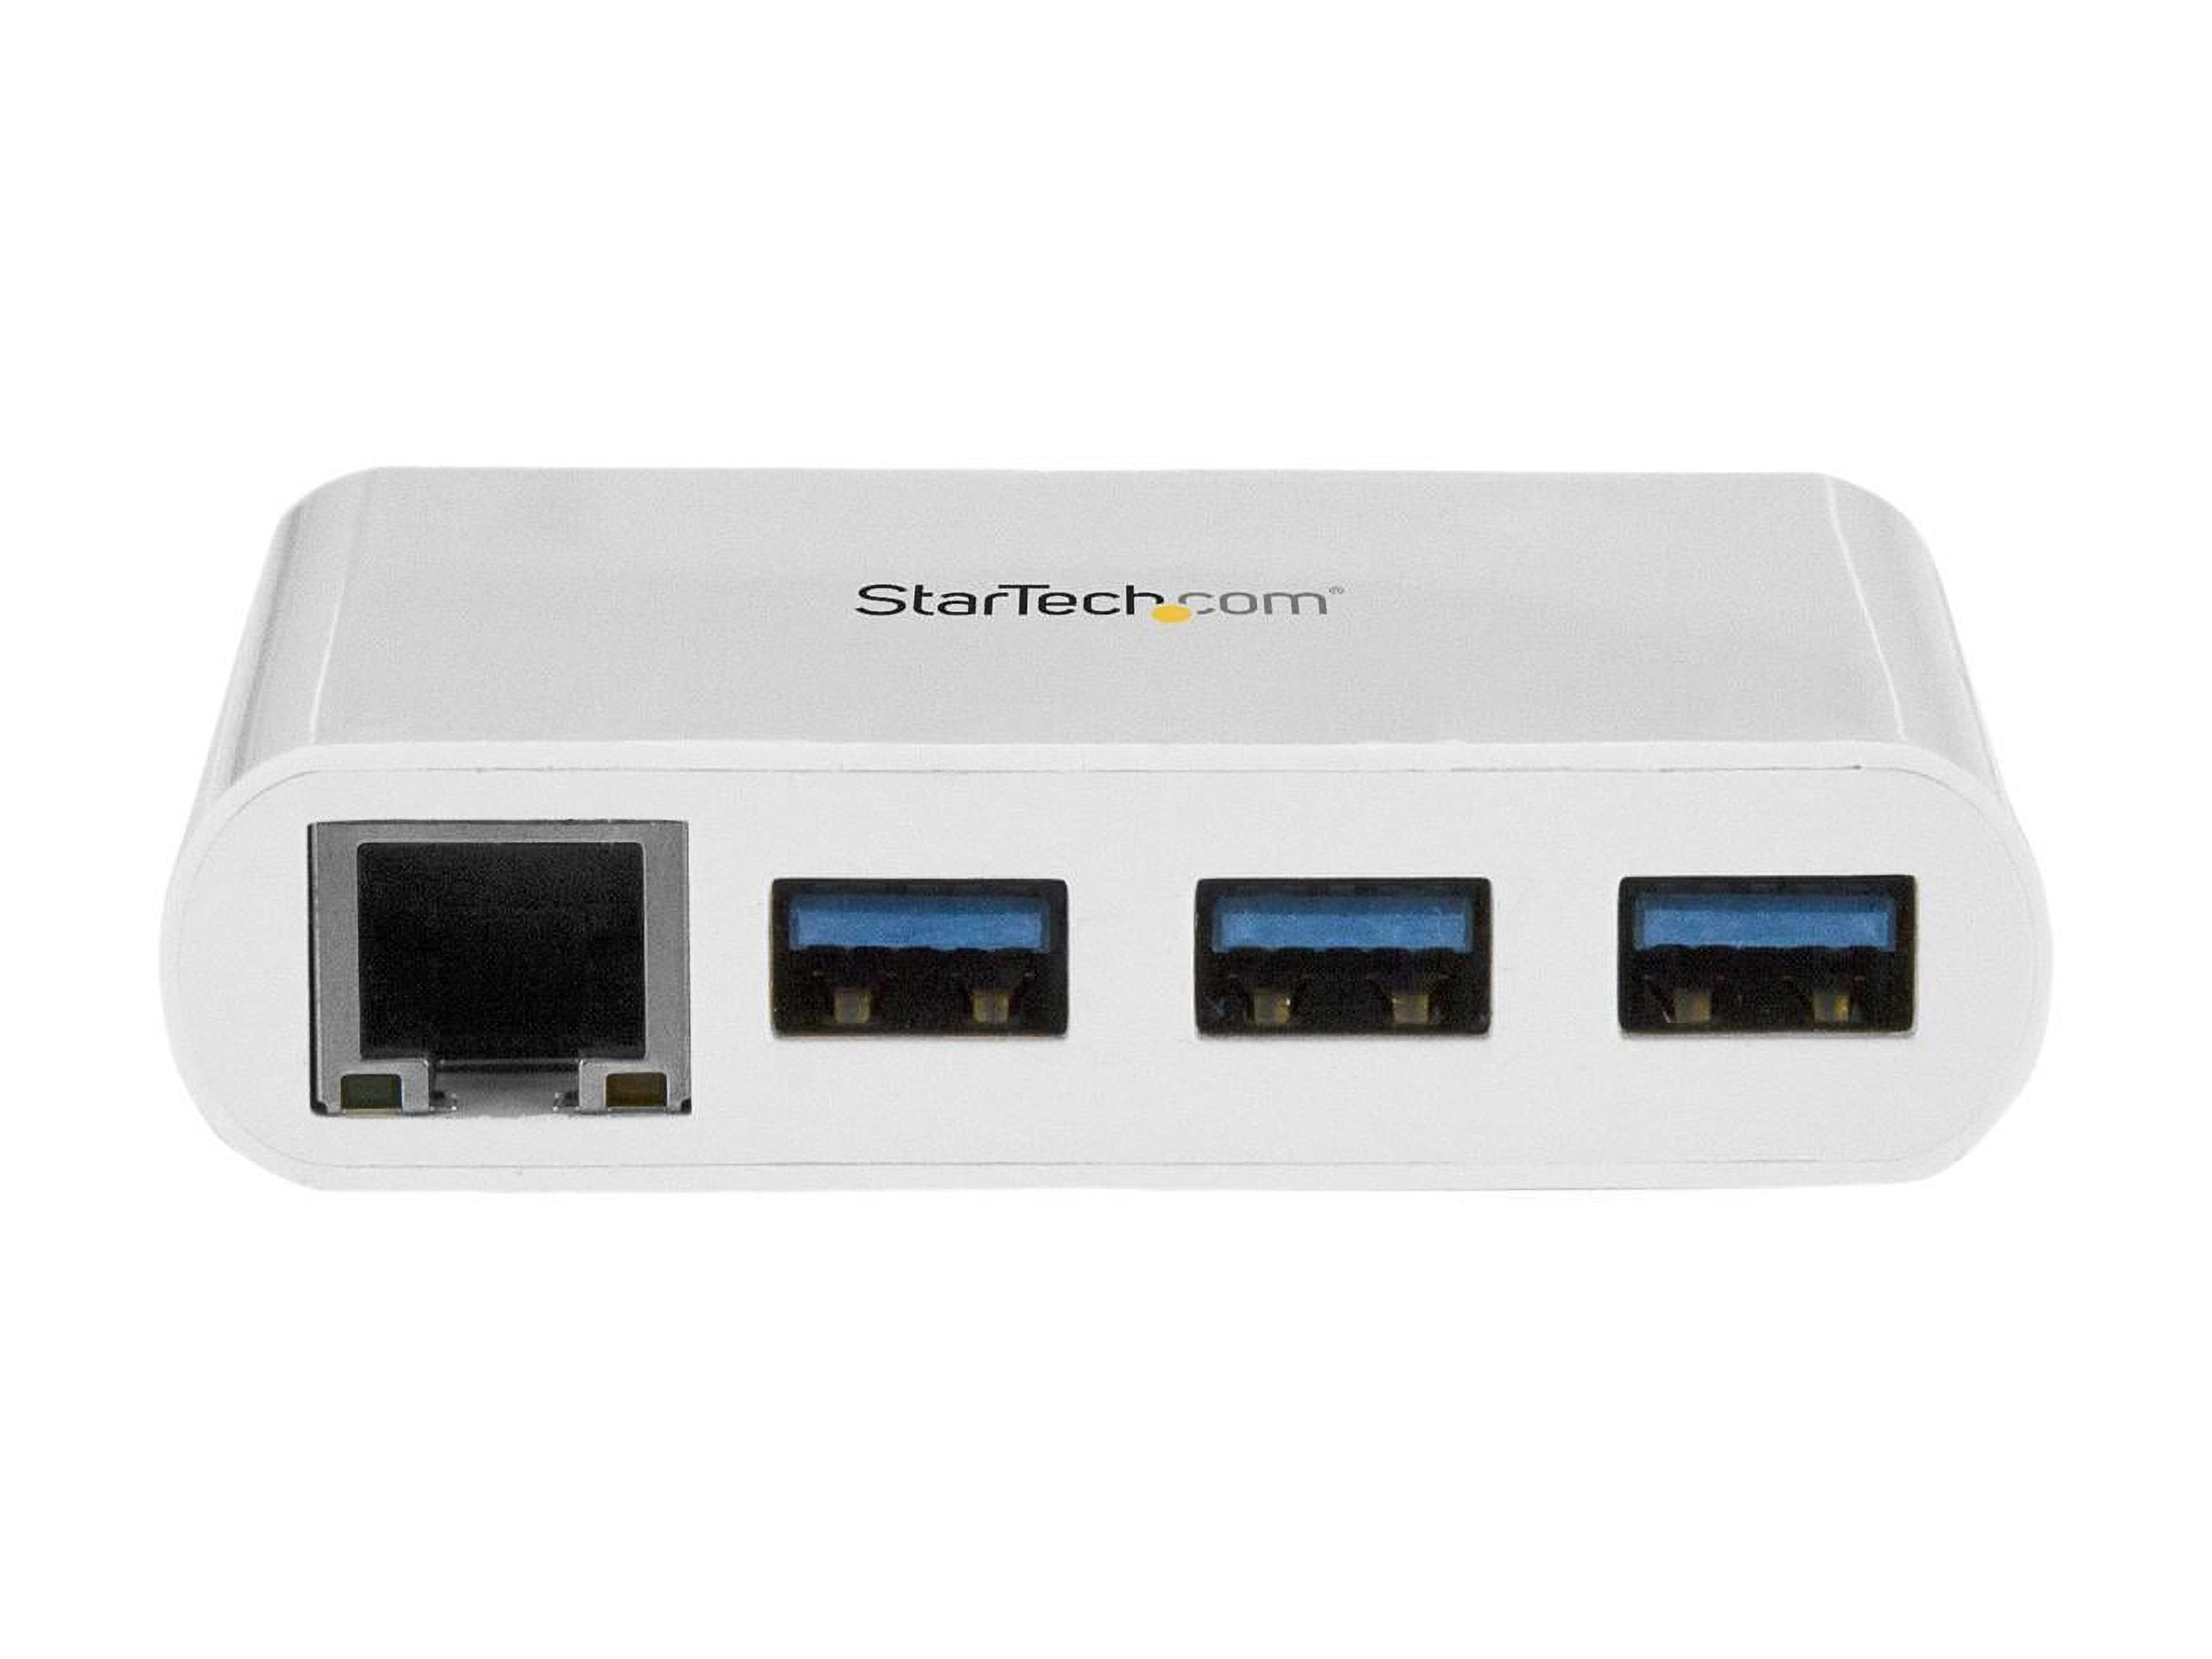 StarTech HB30C3A1GEA USB-C to Ethernet Adapter with 3 Port USB C Hub - Gigabit - White - Thunderbolt 3 Compatible - MacBook Pro 2016 - image 2 of 4